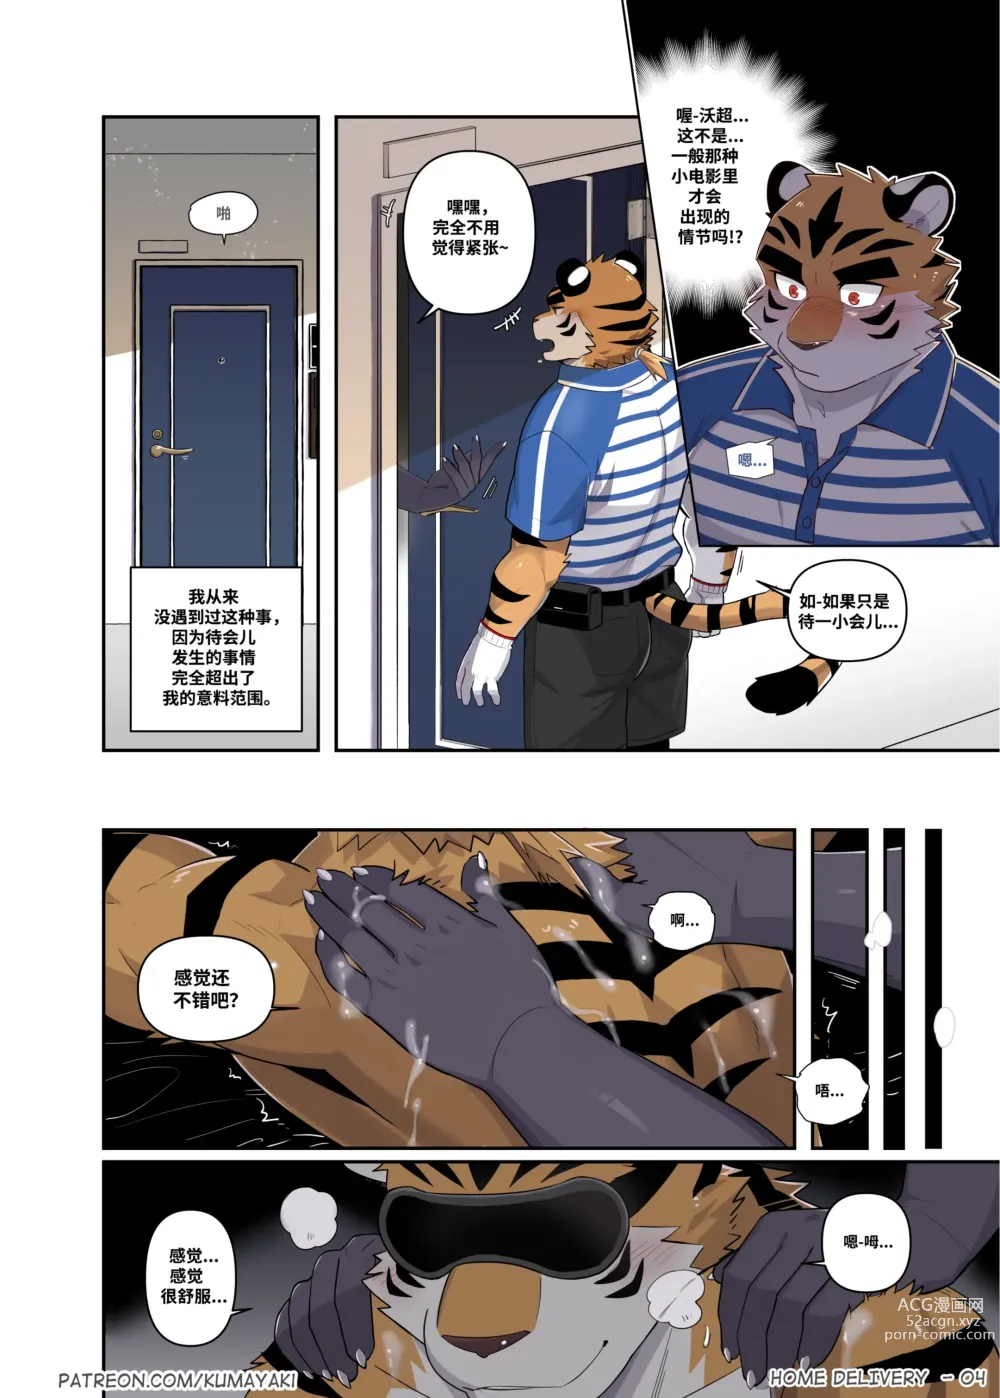 Page 6 of doujinshi Home Delivery HD 狗大汉化